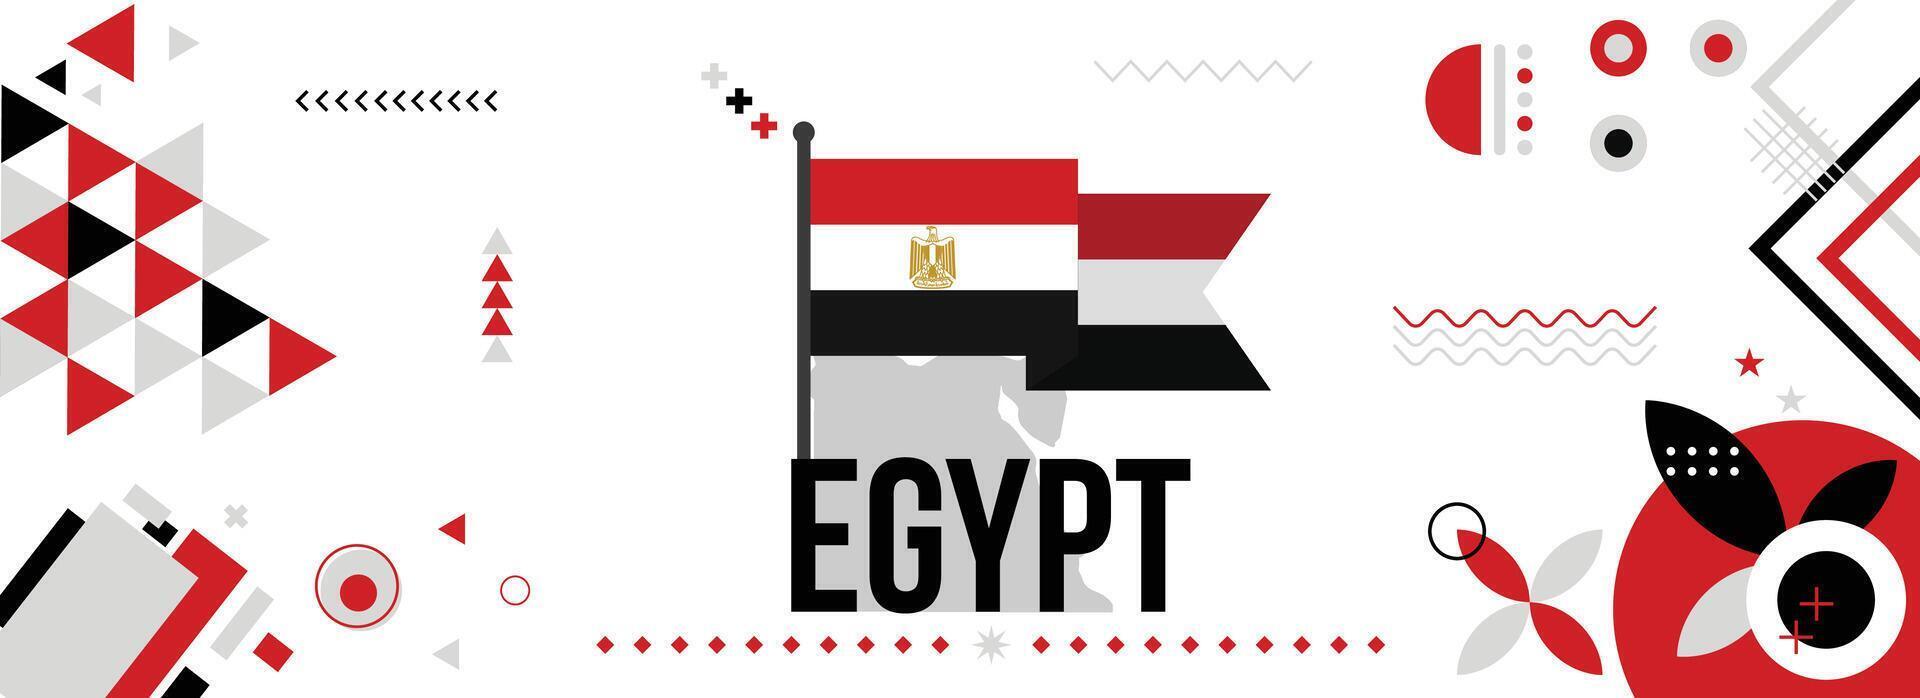 Egypt national or independence day banner for country celebration. Flag and map of Egypt with raised fists. Modern retro design with typorgaphy abstract geometric icons. Vector illustration.